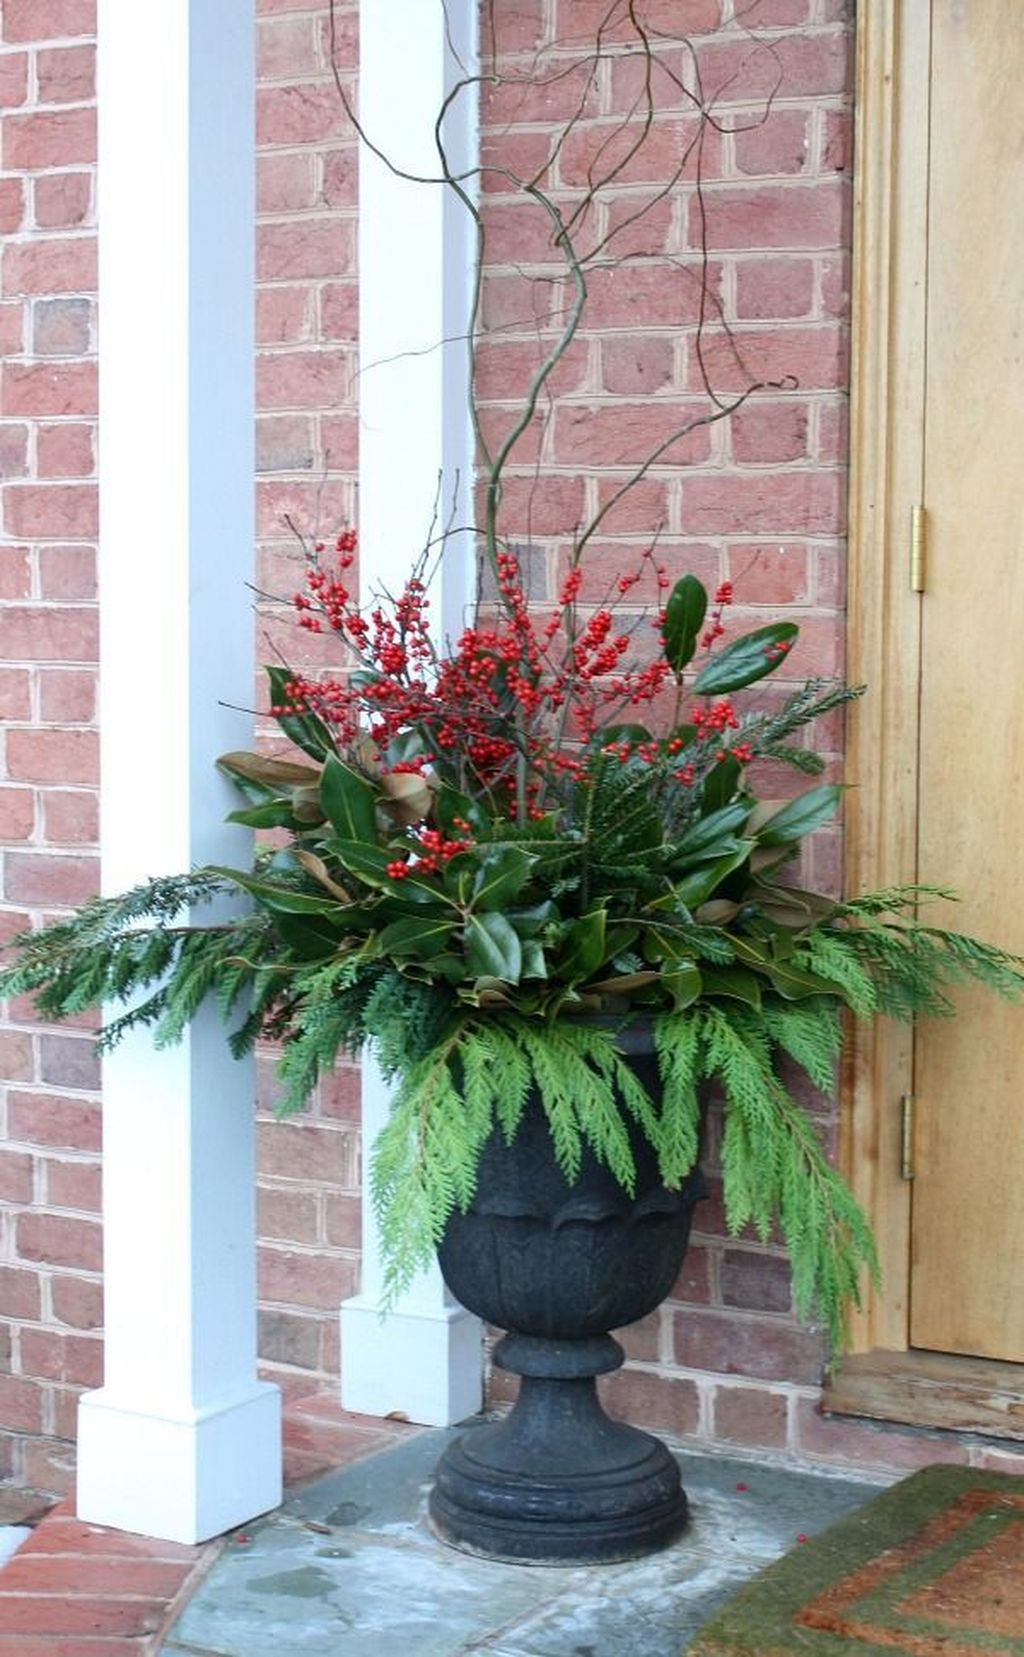 Marvelous Outdoor Holiday Planter Ideas To Beauty Porch Décor 28